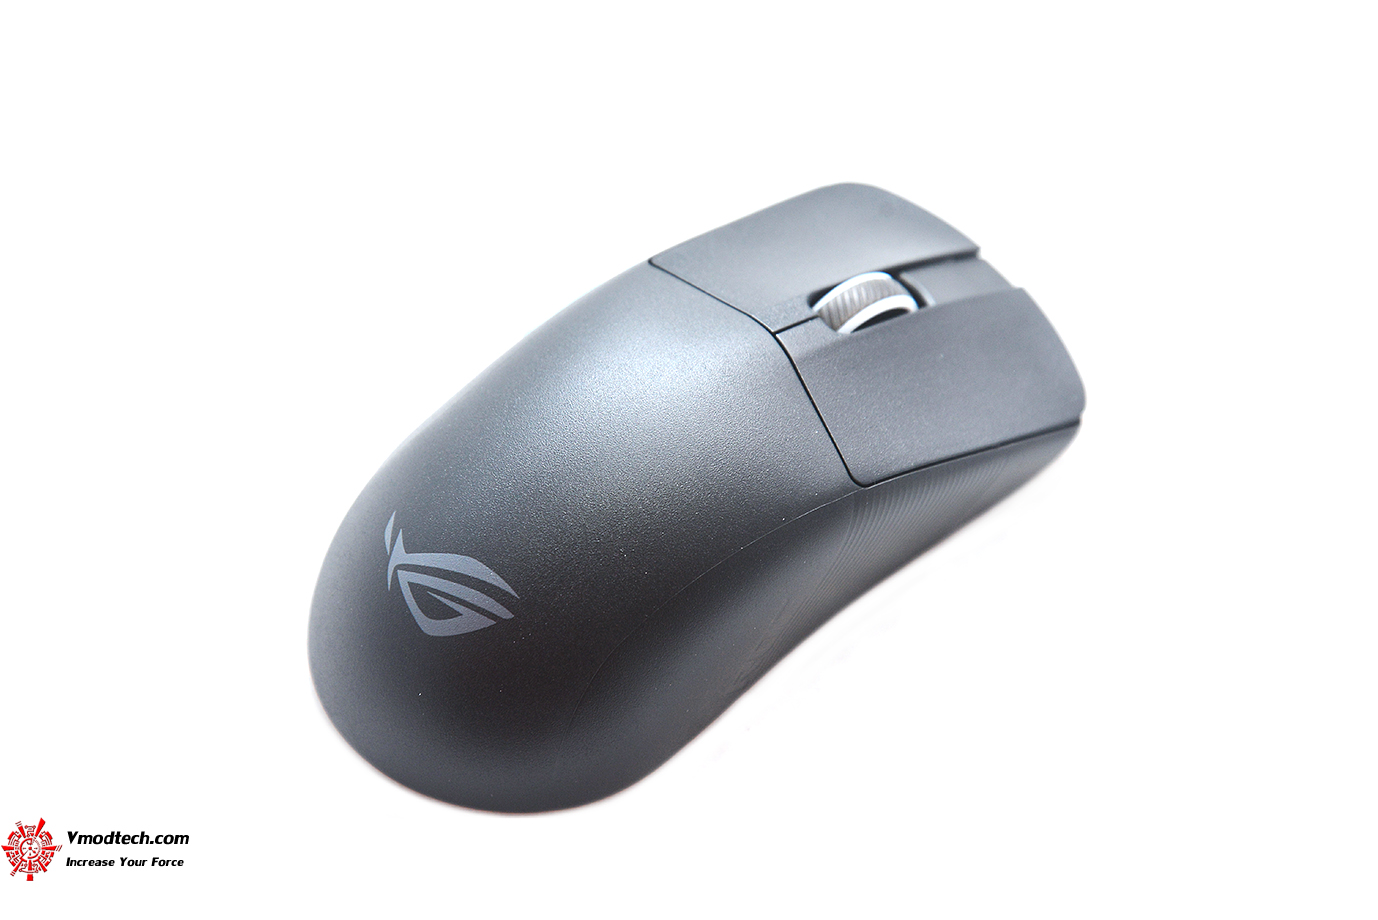 dsc 3788 ROG Harpe Ace Aim Lab Edition Wireless Gaming Mouse Review